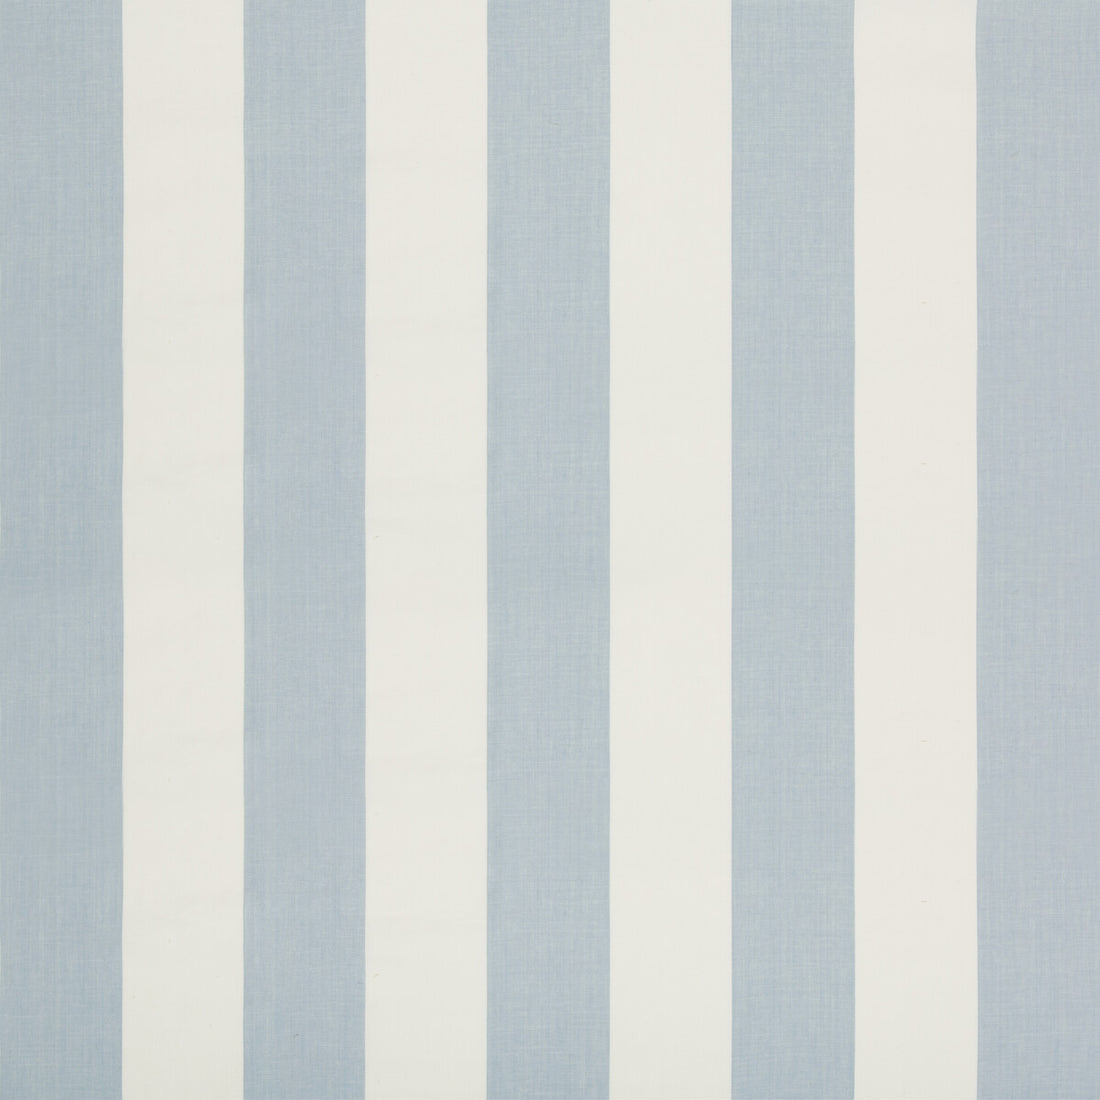 St Croix Stripe fabric in sky color - pattern 2018145.115.0 - by Lee Jofa in the Suzanne Kasler The Riviera collection